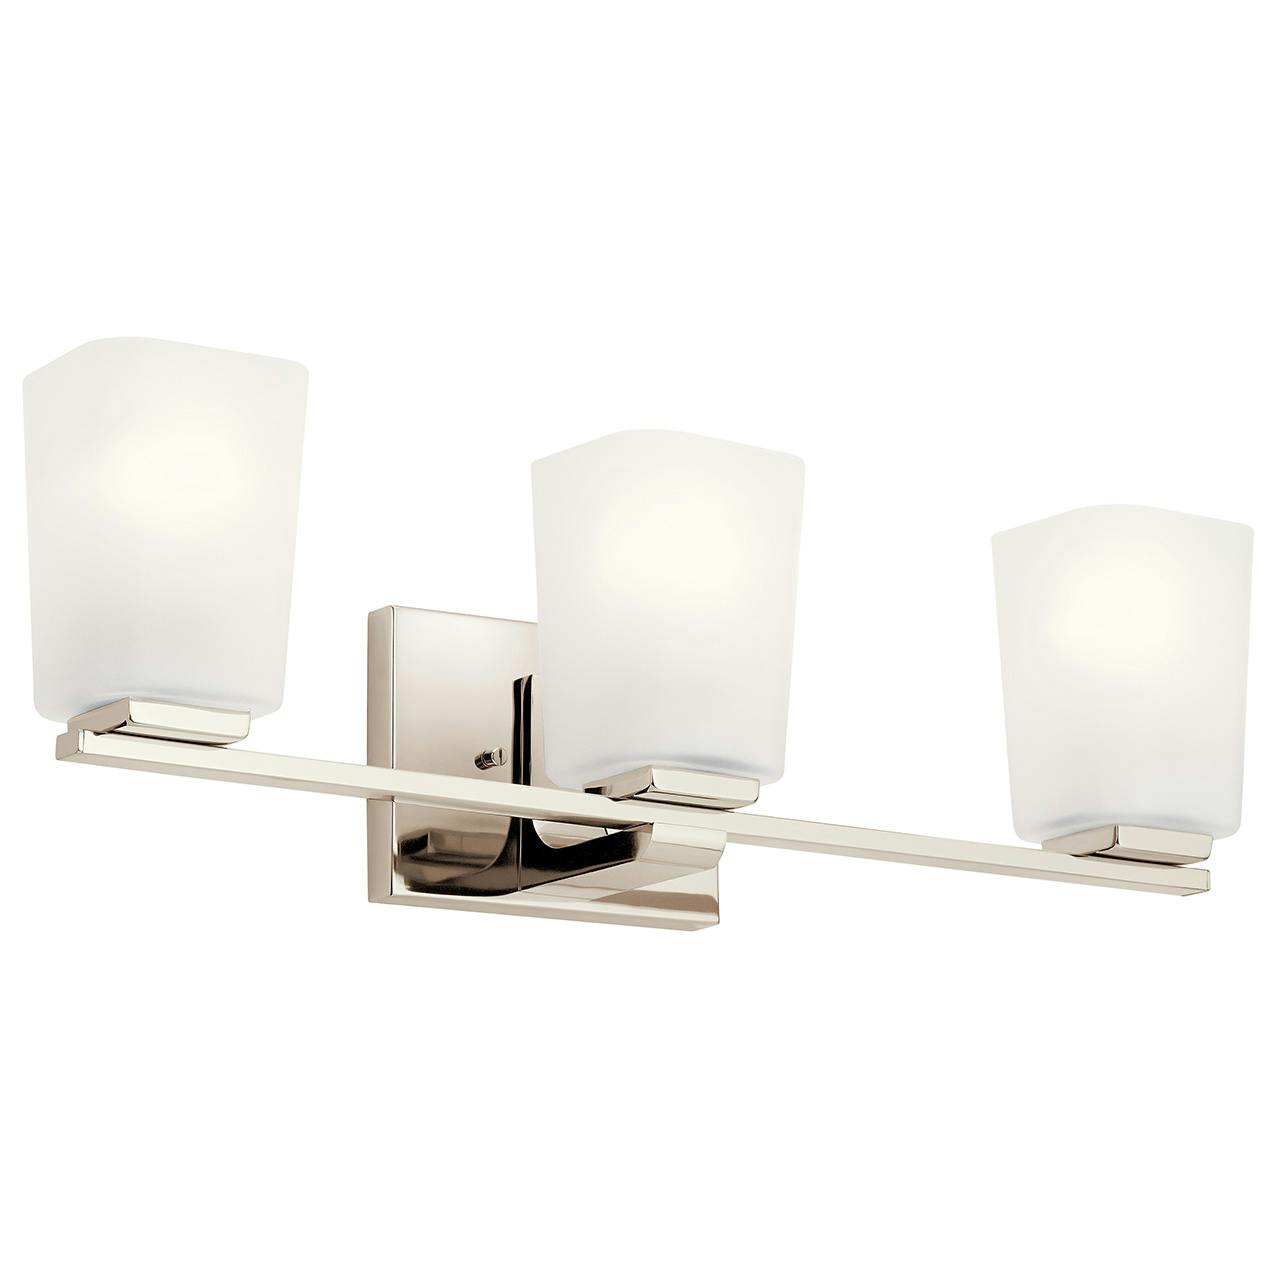 Roehm 3 Light Vanity Light Nickel on a white background